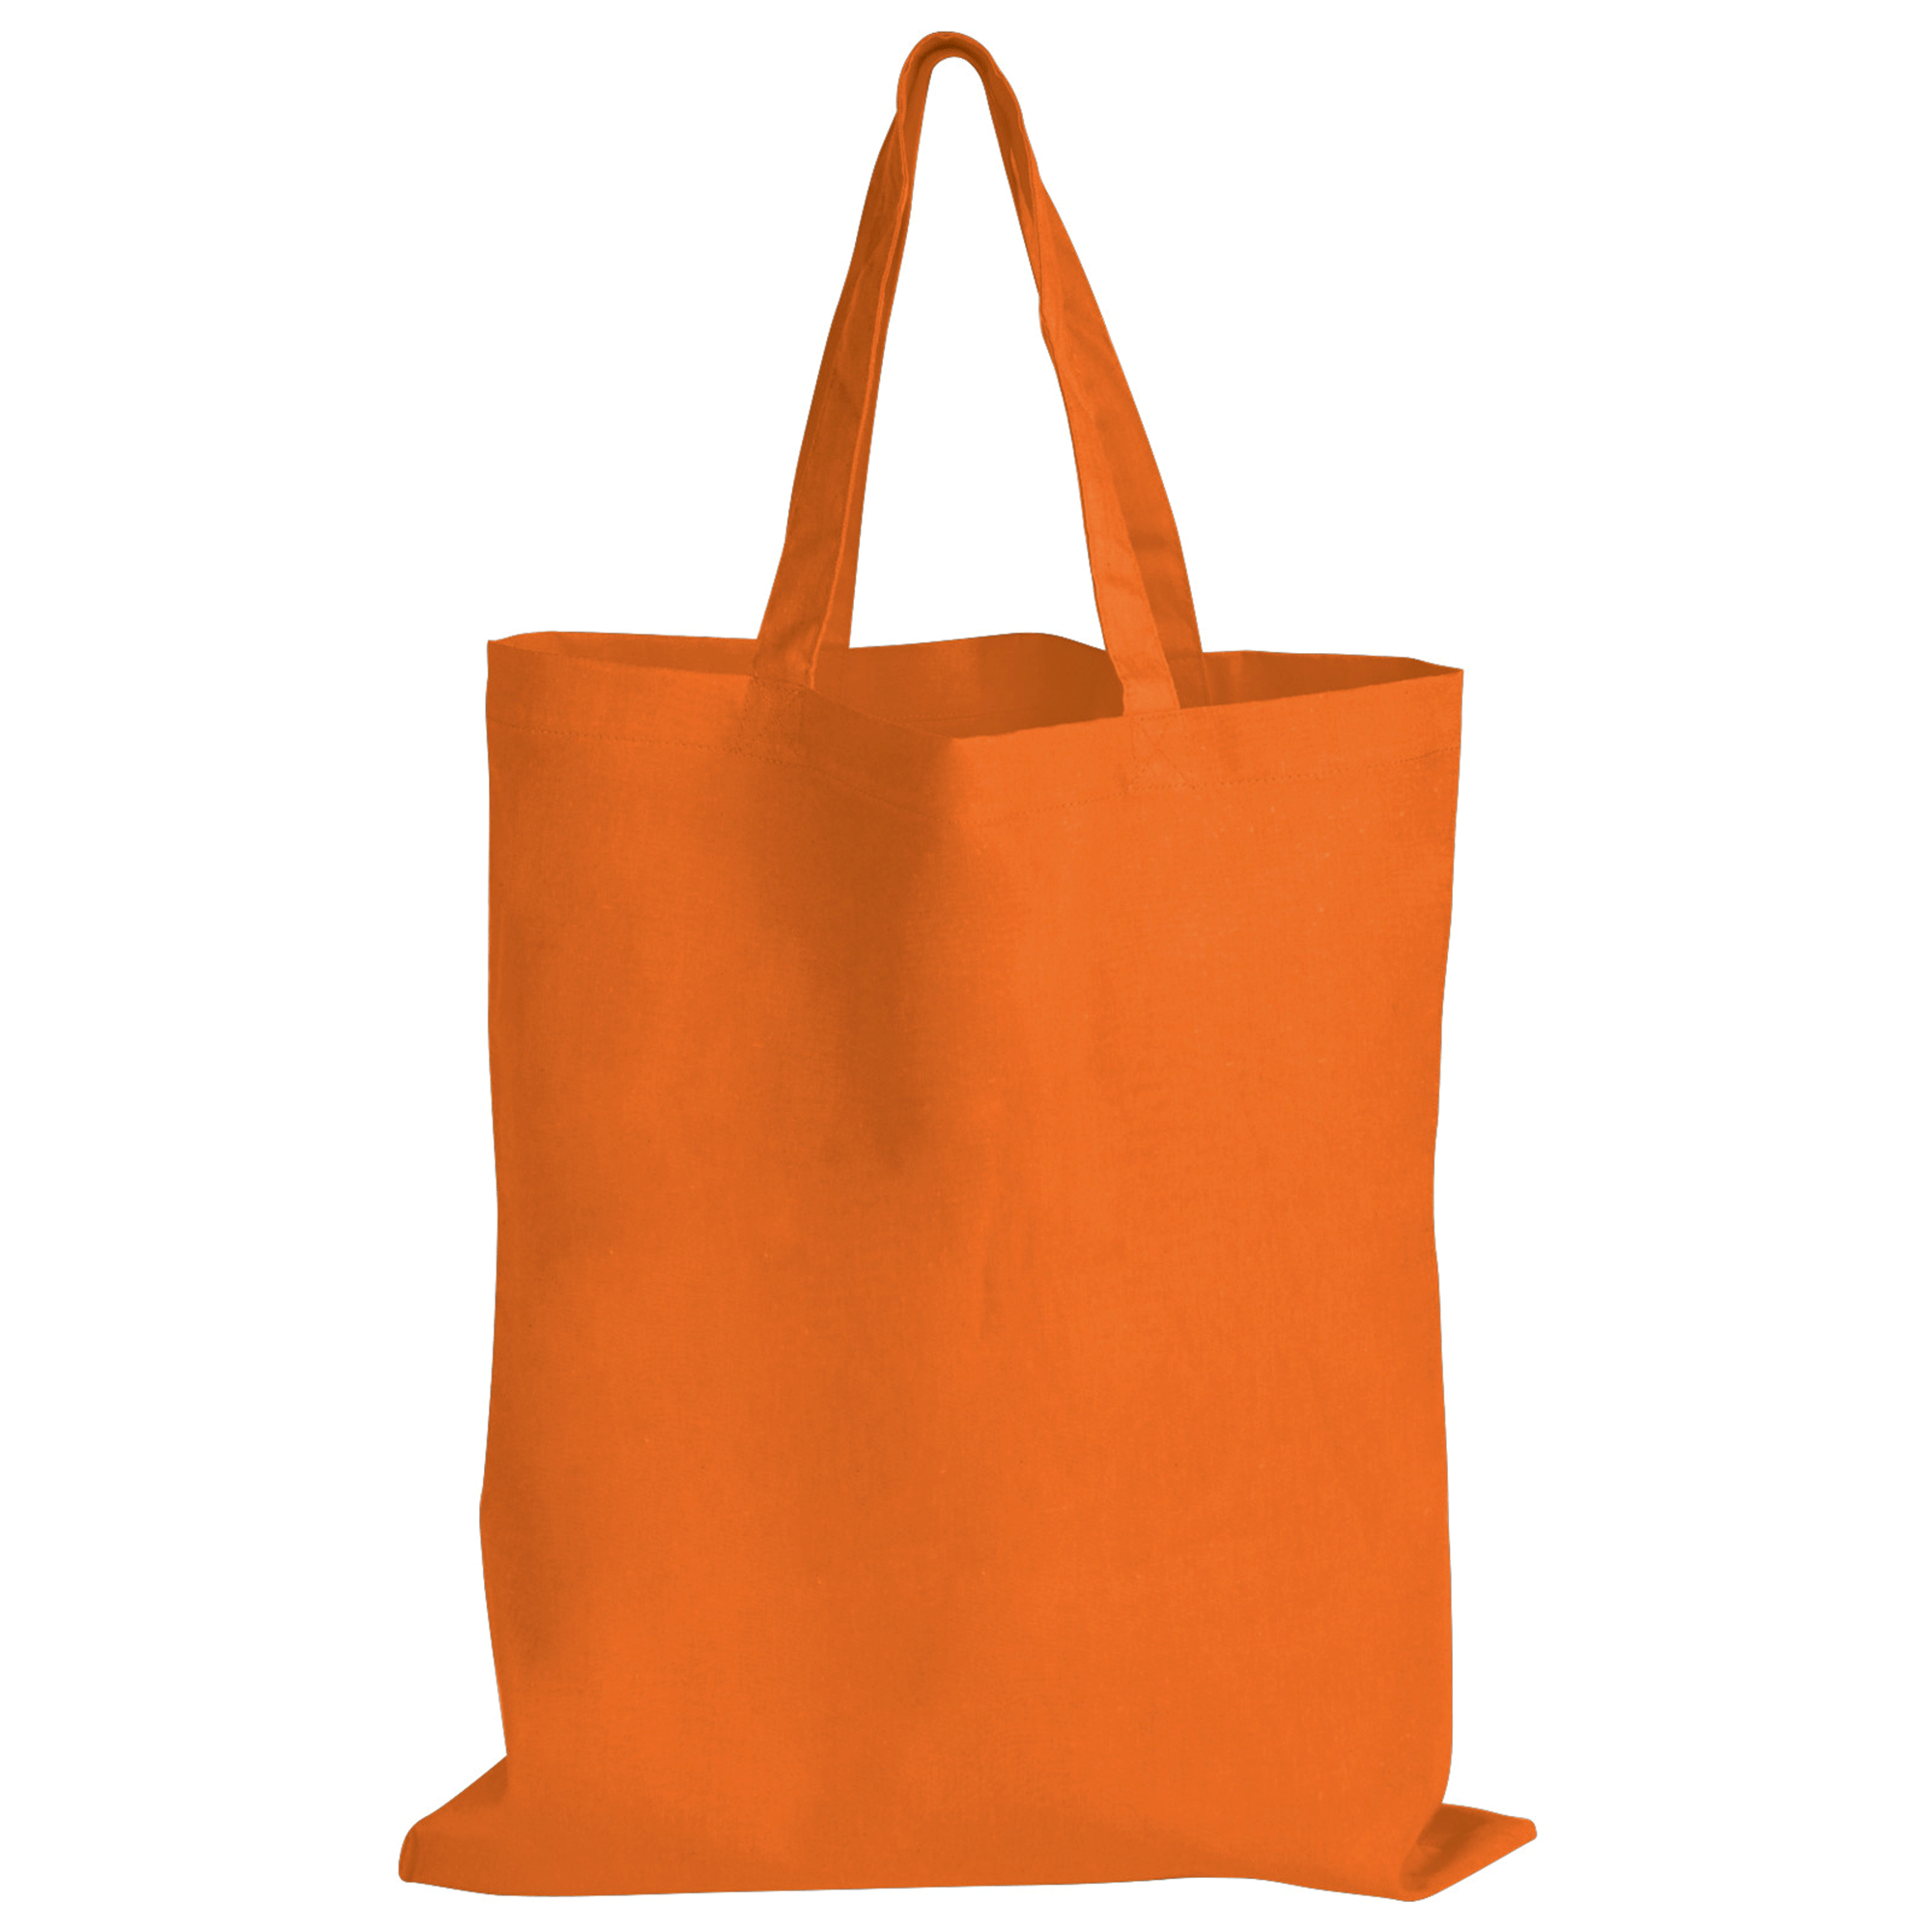 Personalise Double Short Handle Cotton Tote Bag with Text | Pens.com